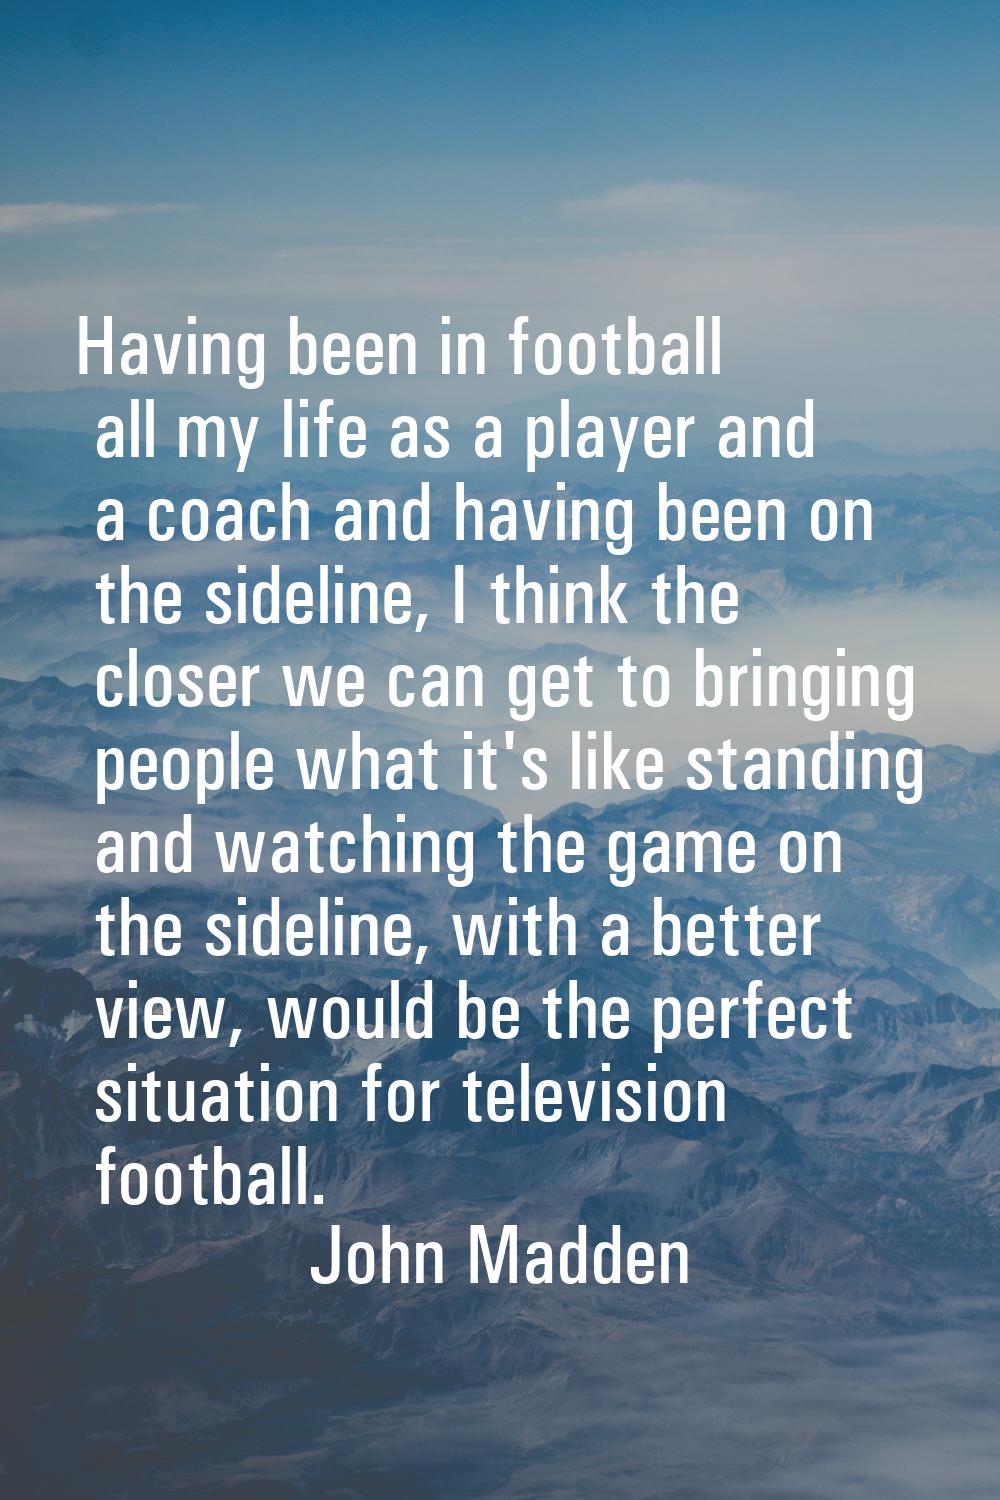 Having been in football all my life as a player and a coach and having been on the sideline, I thin